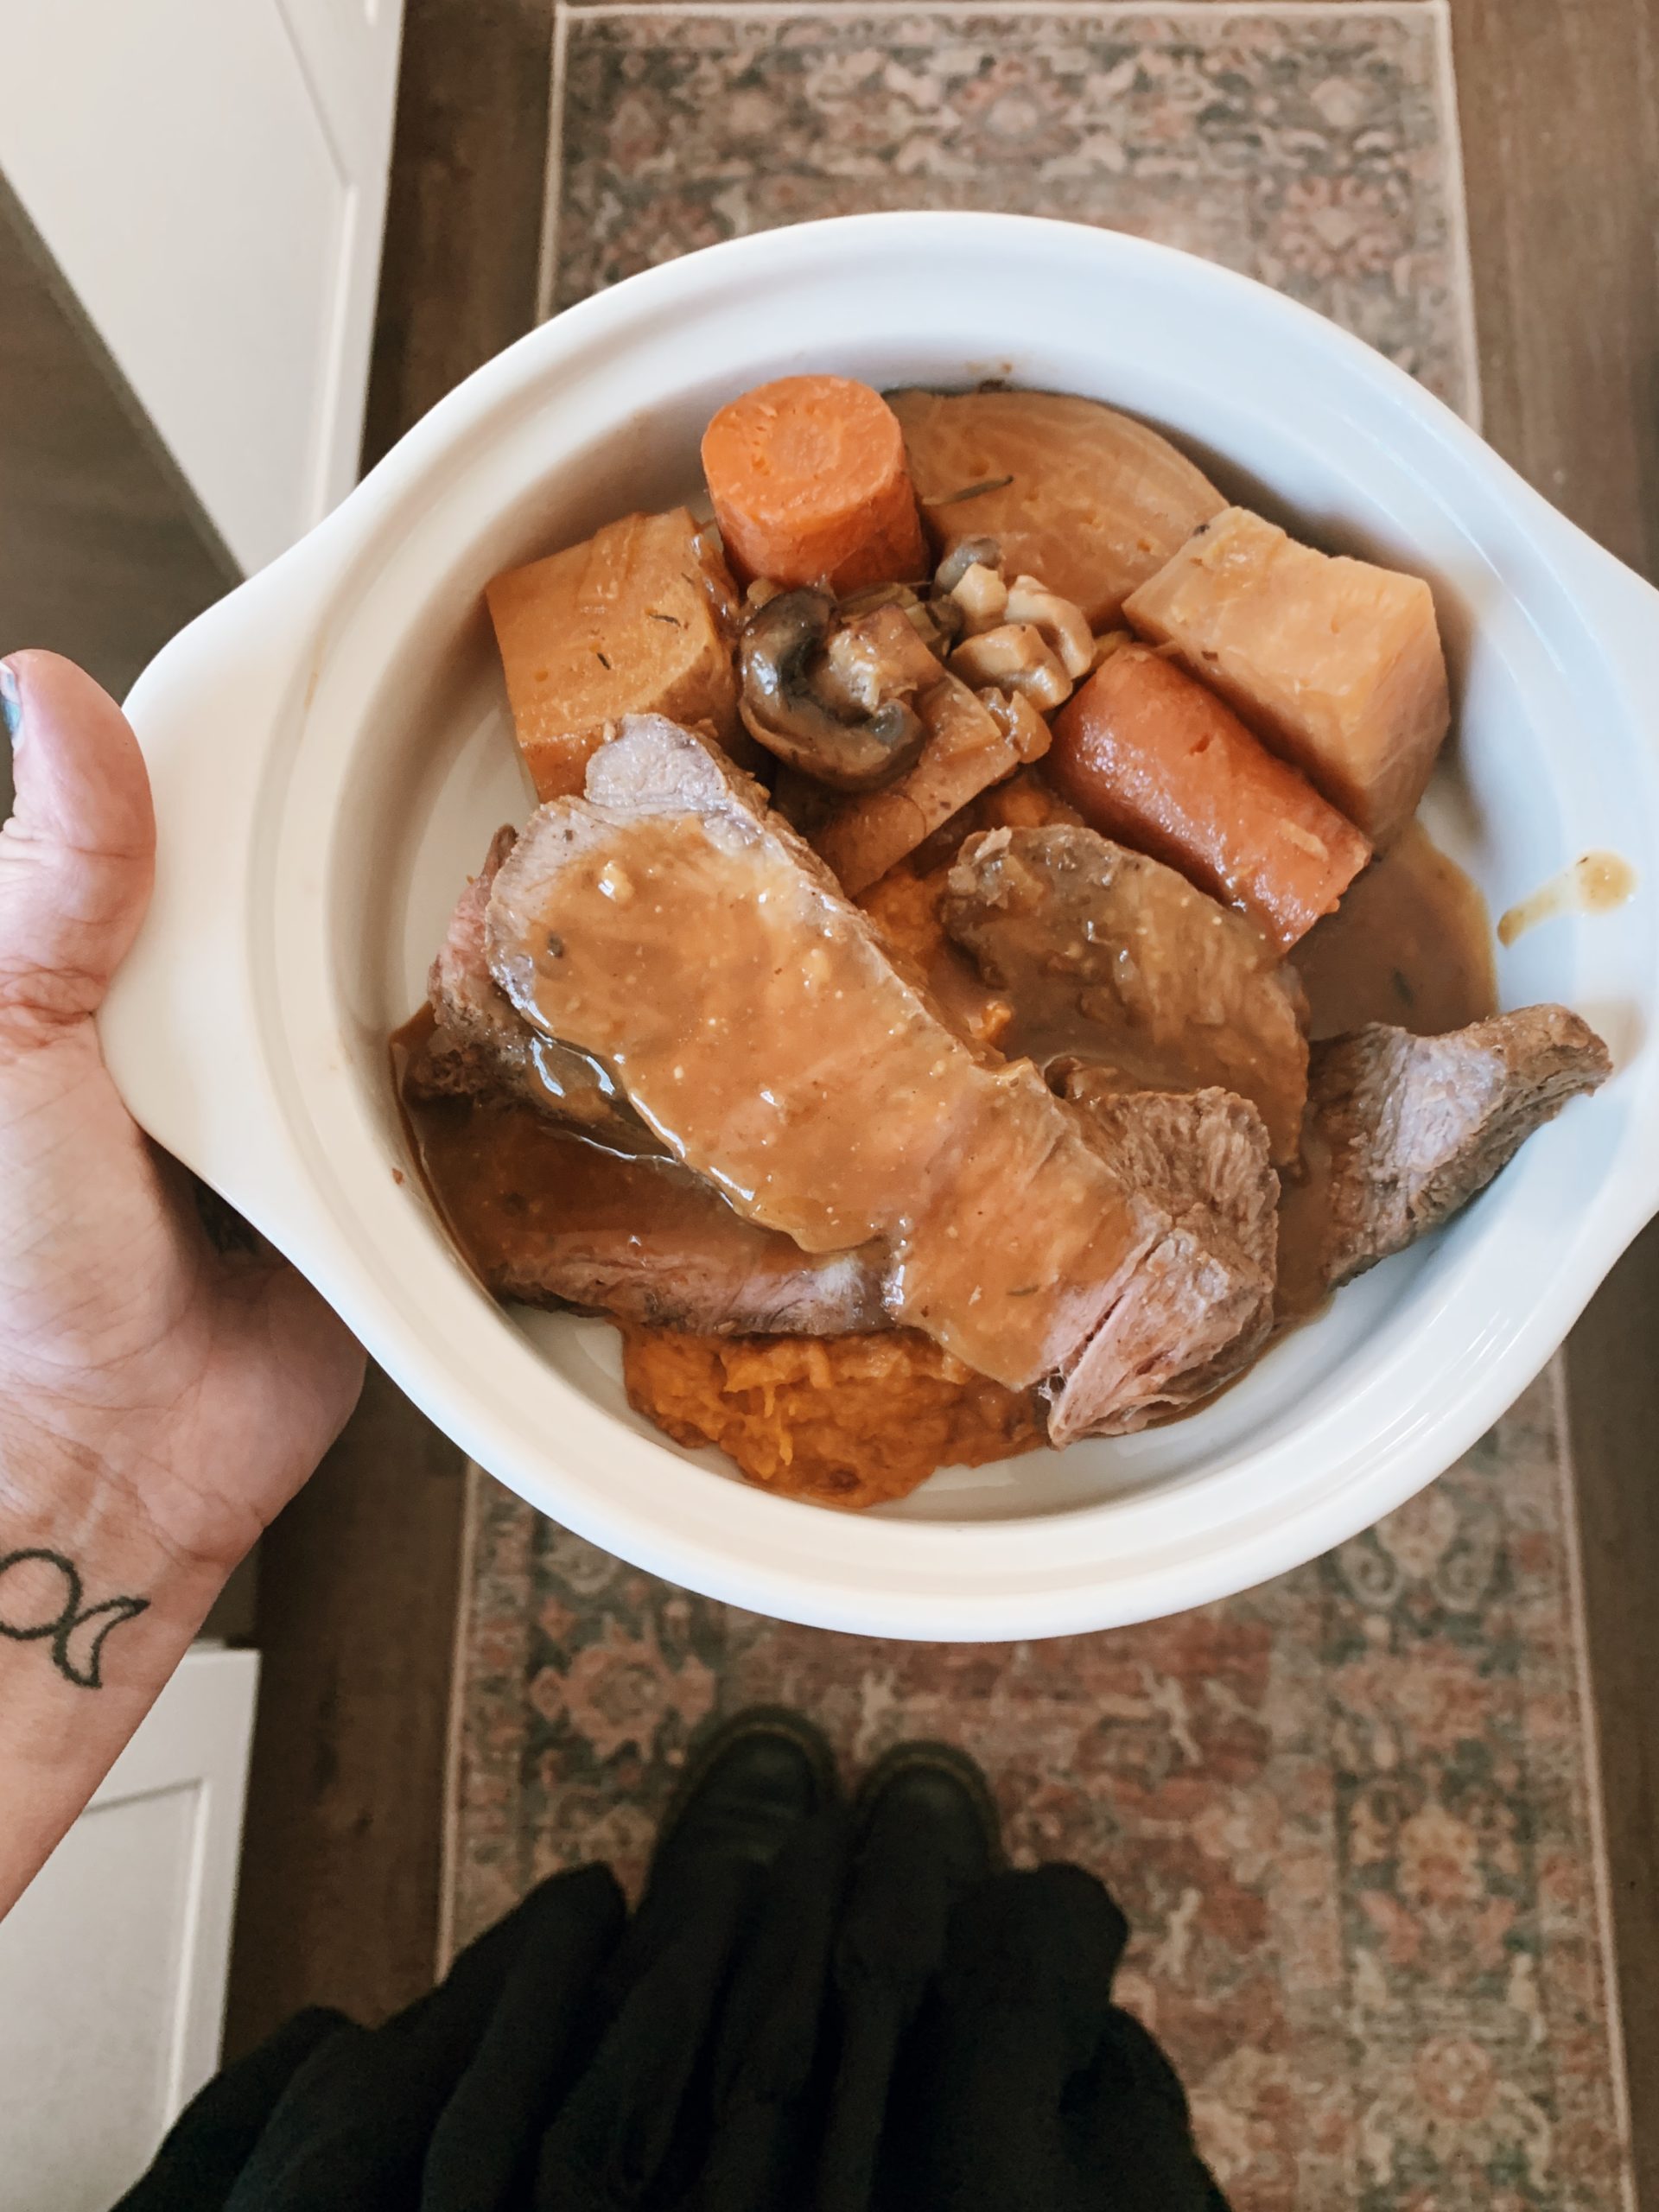 iPhone photo of sliced beef chuck blade roast over sweet potato mash and roasted golden veggies with a goddess tattoo on the wrist